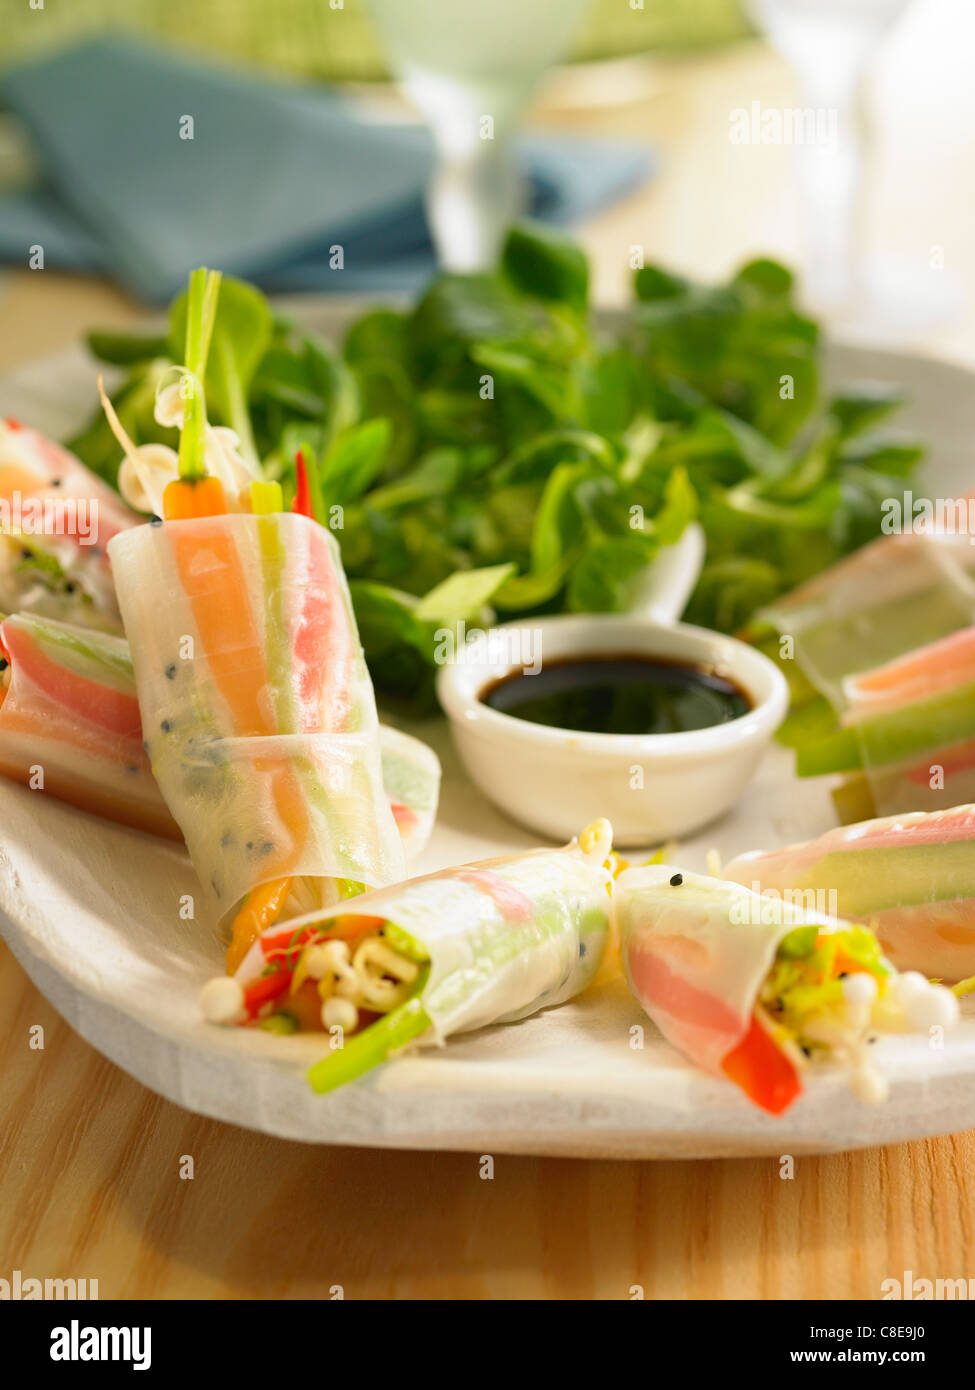 Rice sheets filled with young vegetables and soya sauce Stock Photo